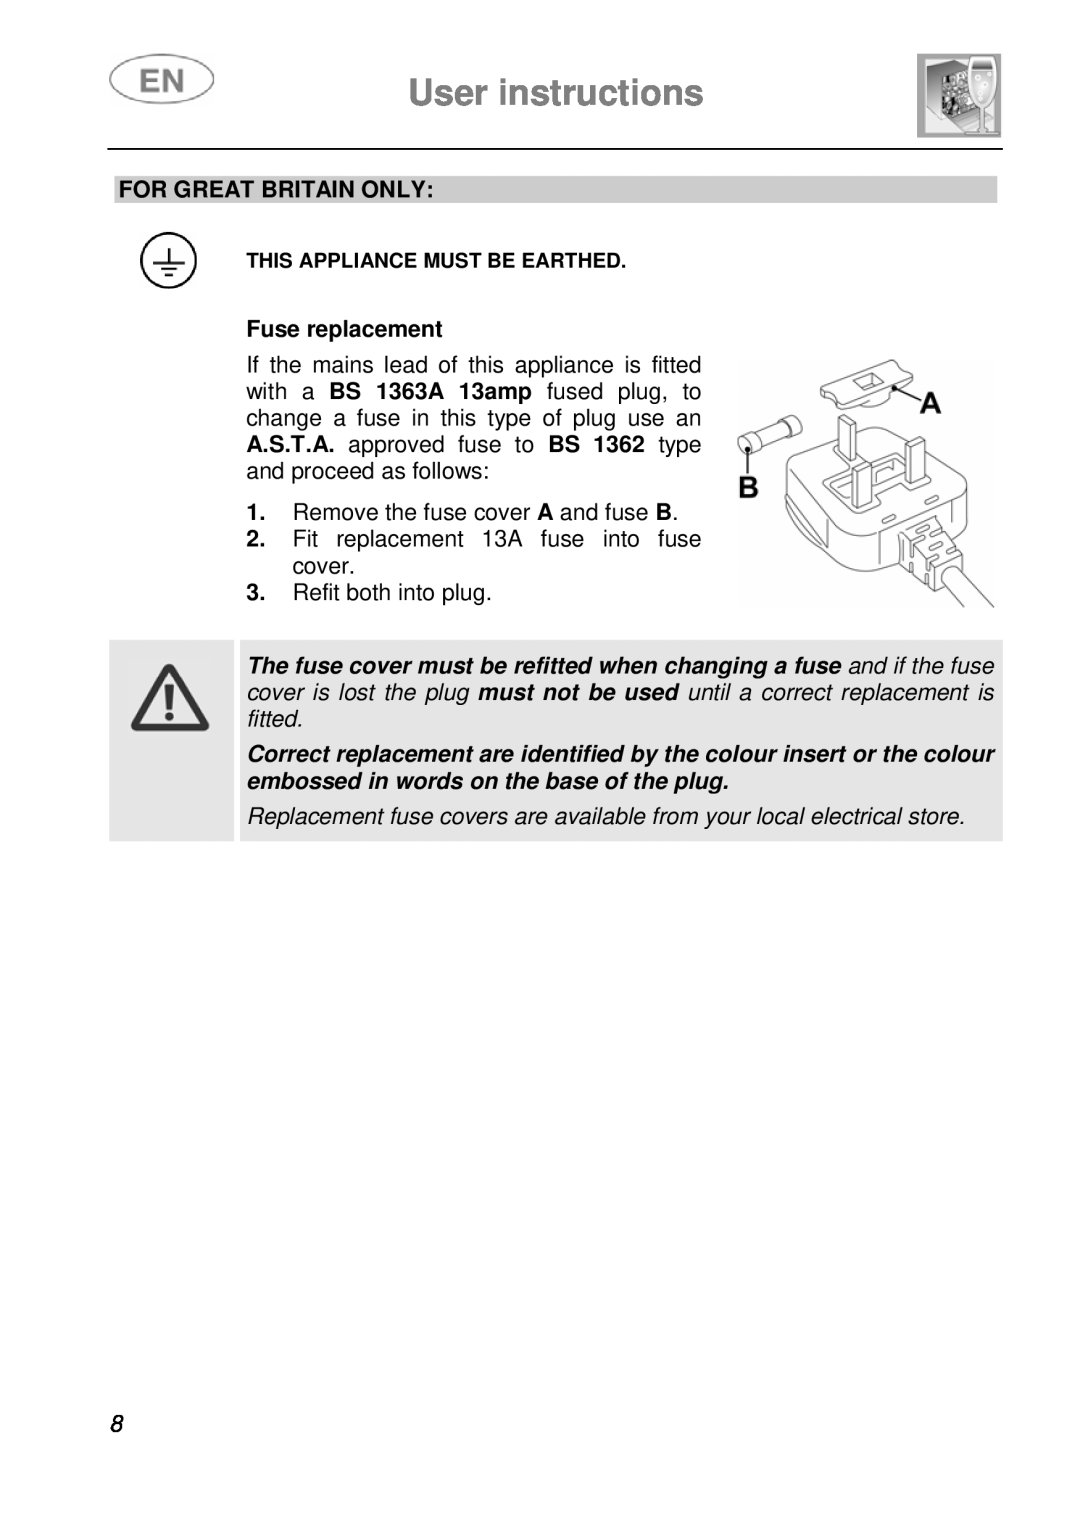 Smeg DF410BL1 instruction manual User instructions, For Great Britain Only, Fuse replacement 